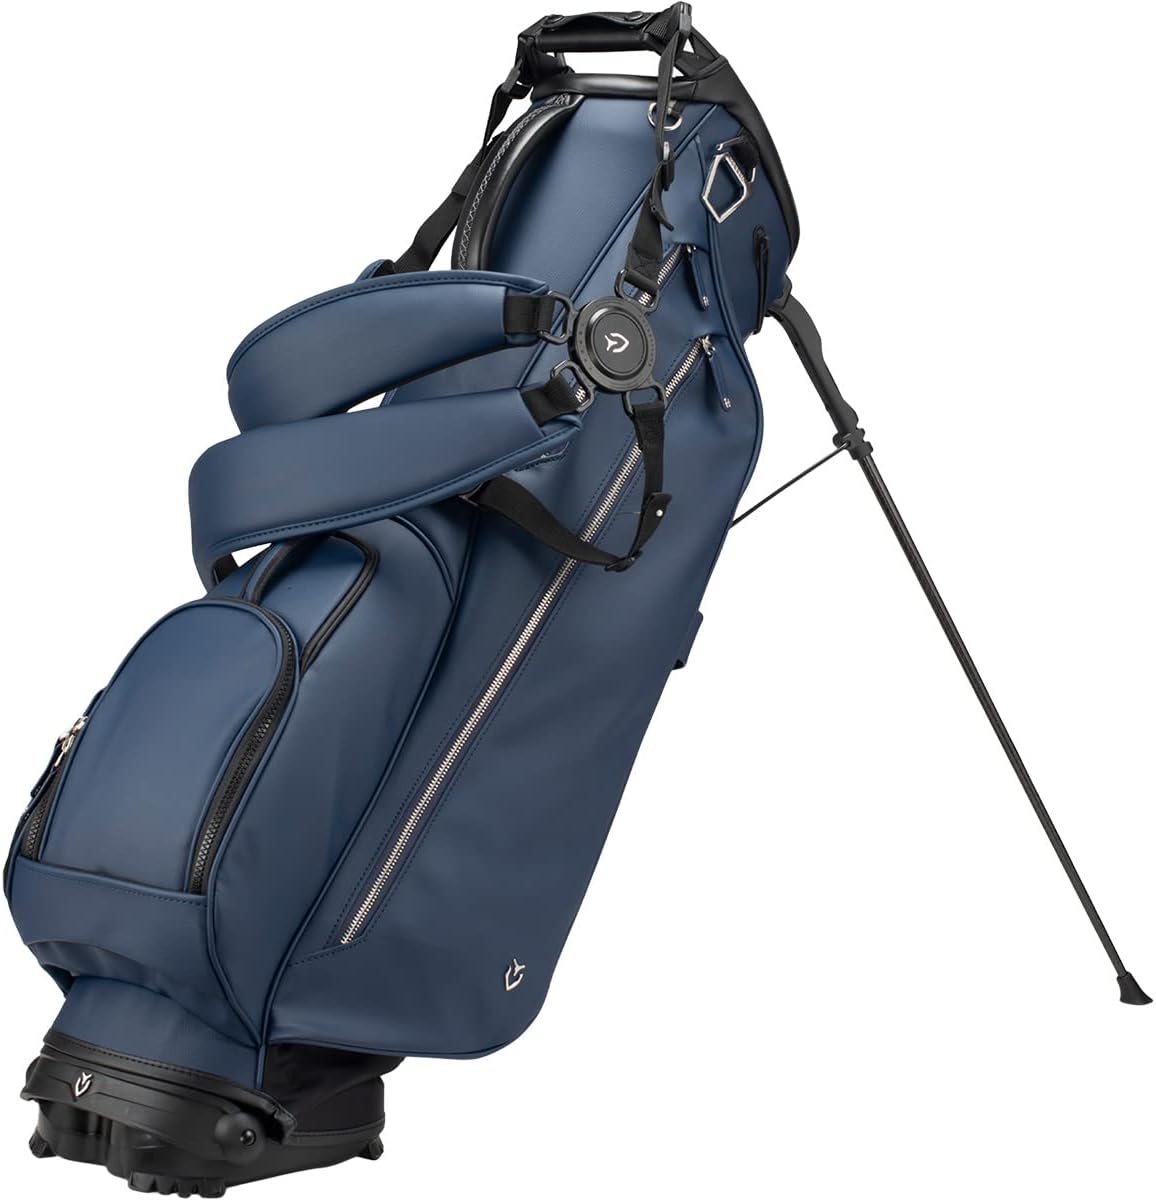 Vessel VLX Lux Stand Bag